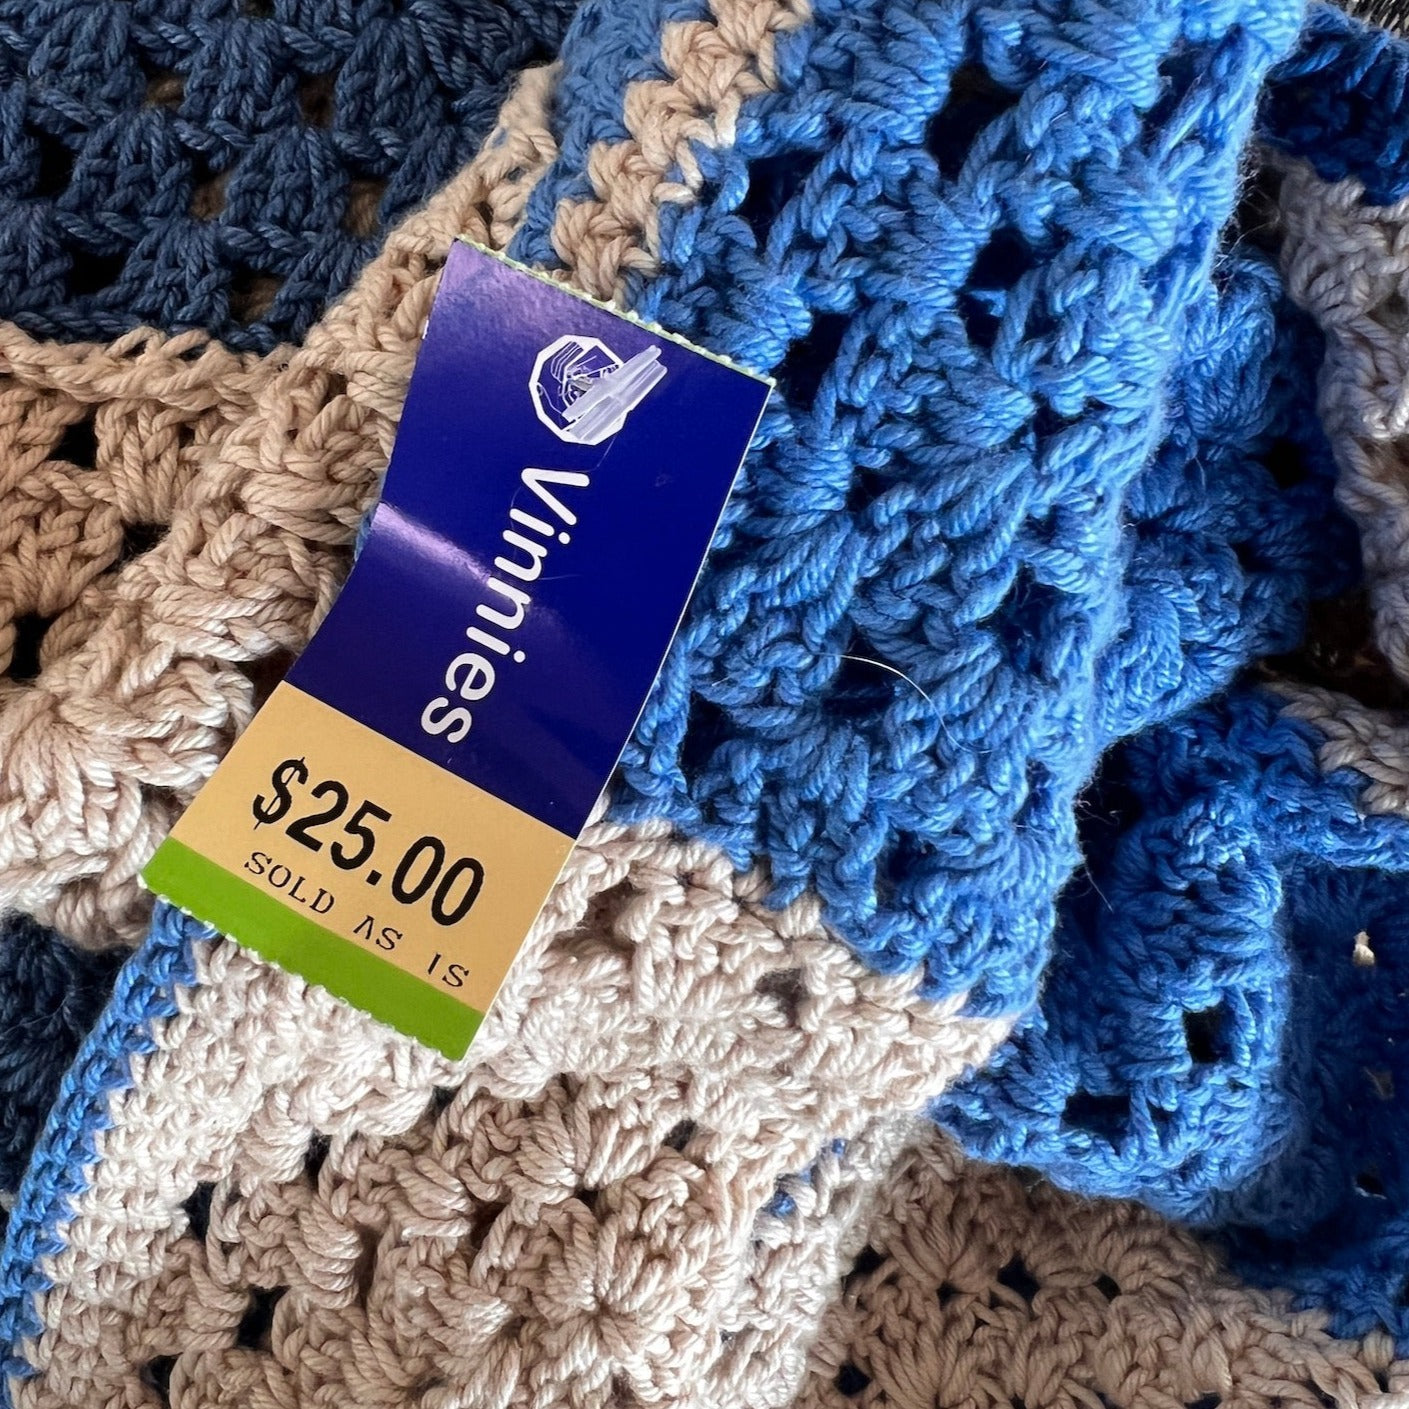 
                  
                    blue and cream crochet rug - found at Vinnies
                  
                